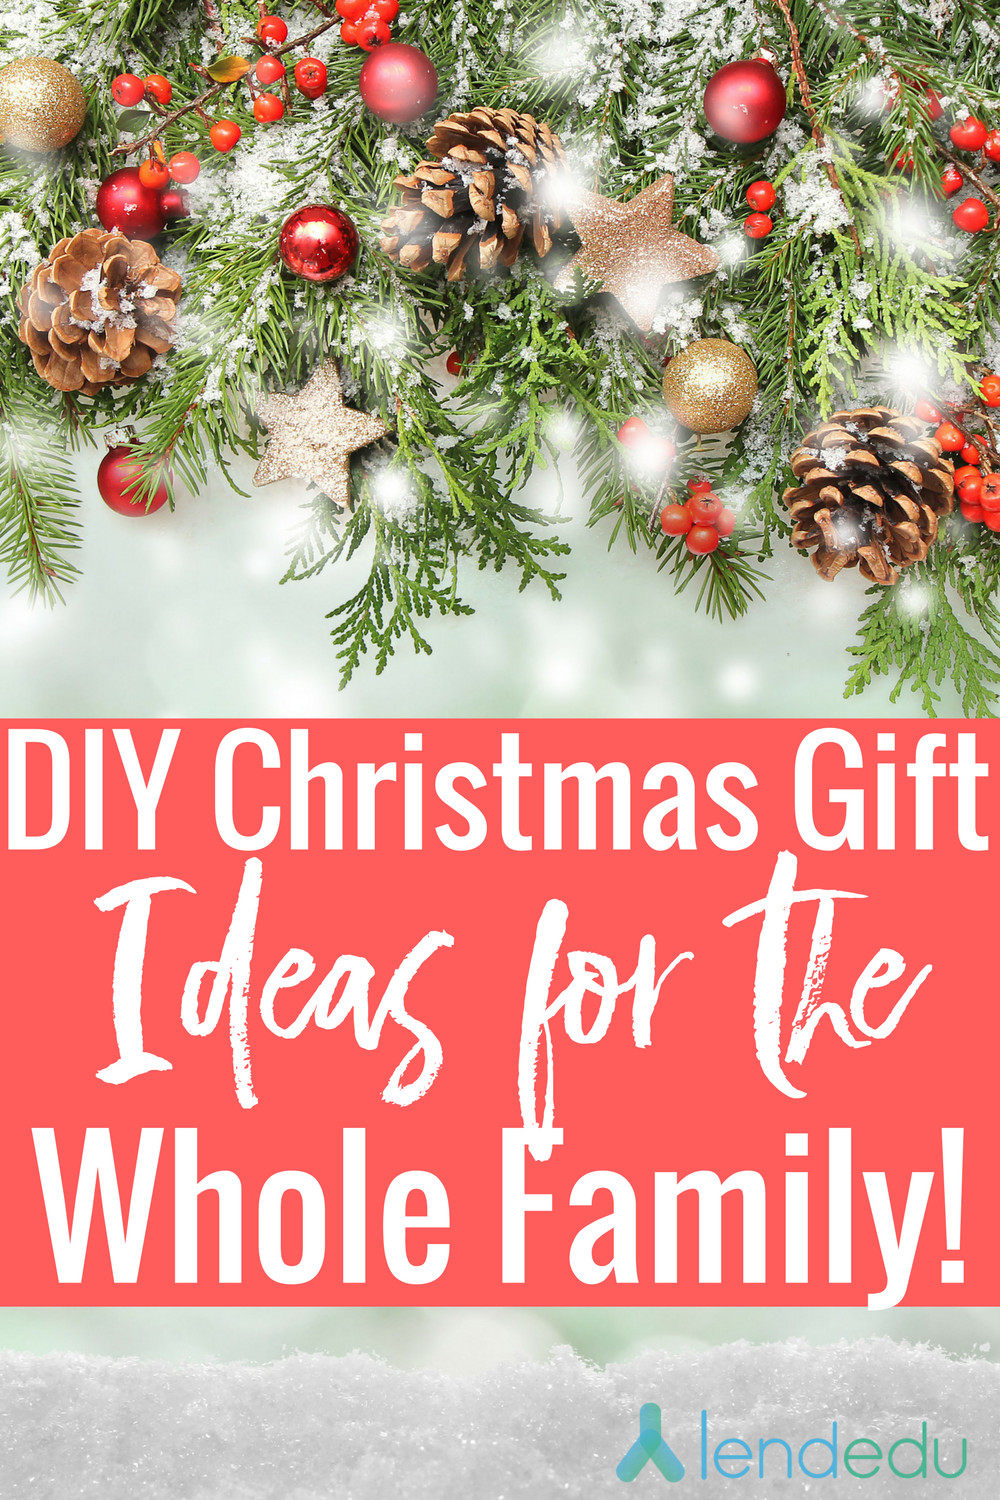 DIY Christmas Gifts For Family
 DIY Christmas Gifts for the Whole Family LendEDU